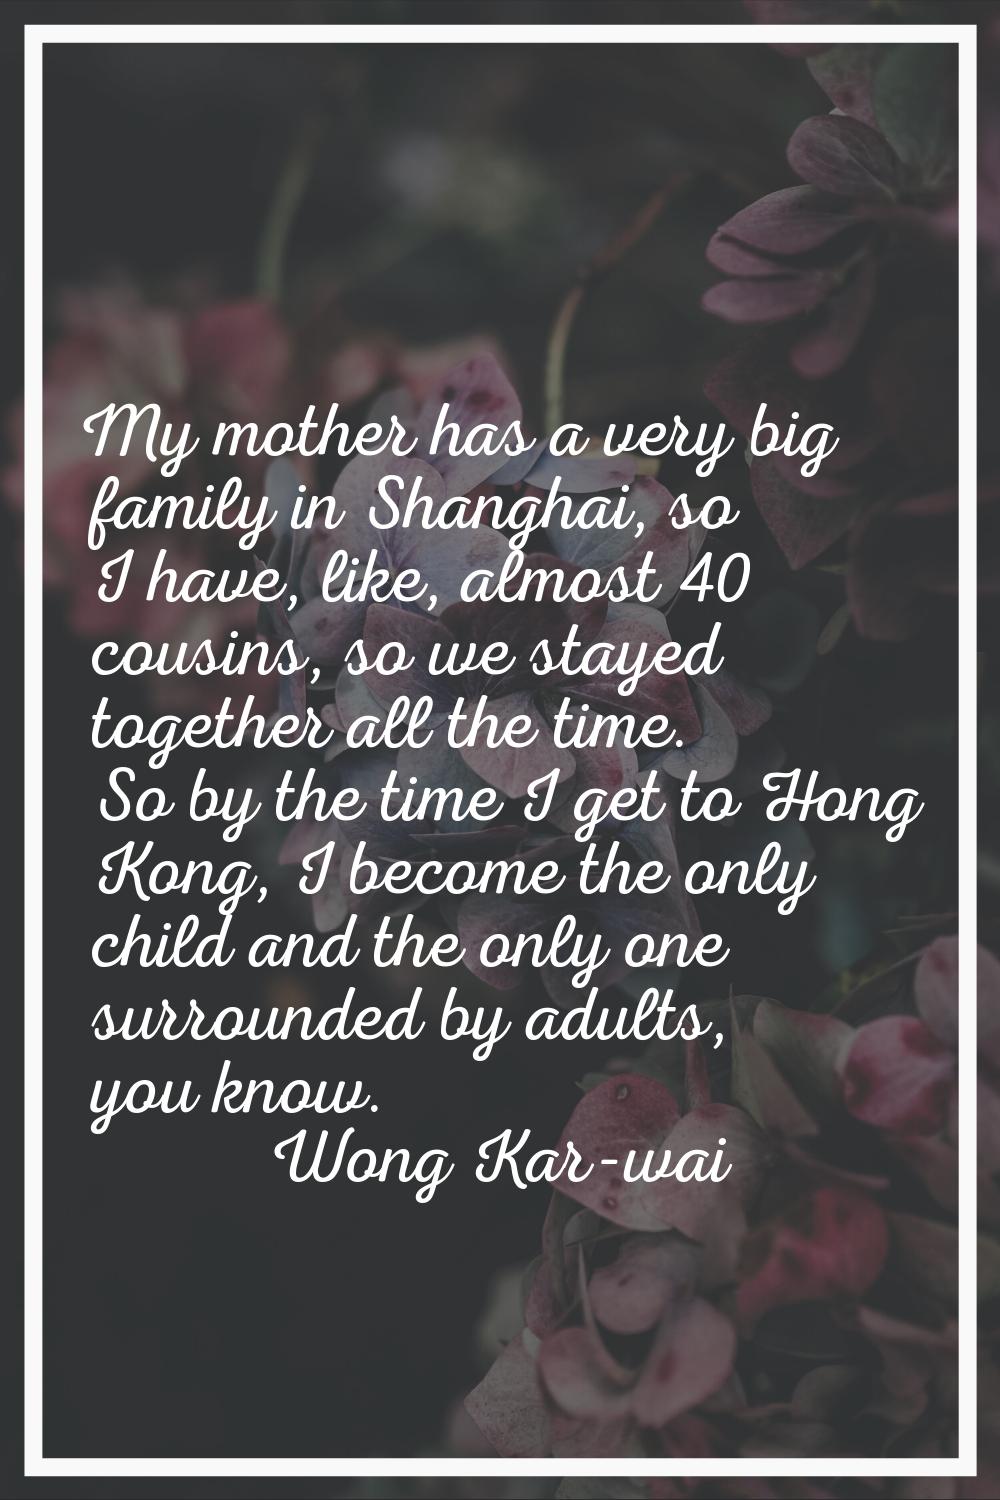 My mother has a very big family in Shanghai, so I have, like, almost 40 cousins, so we stayed toget